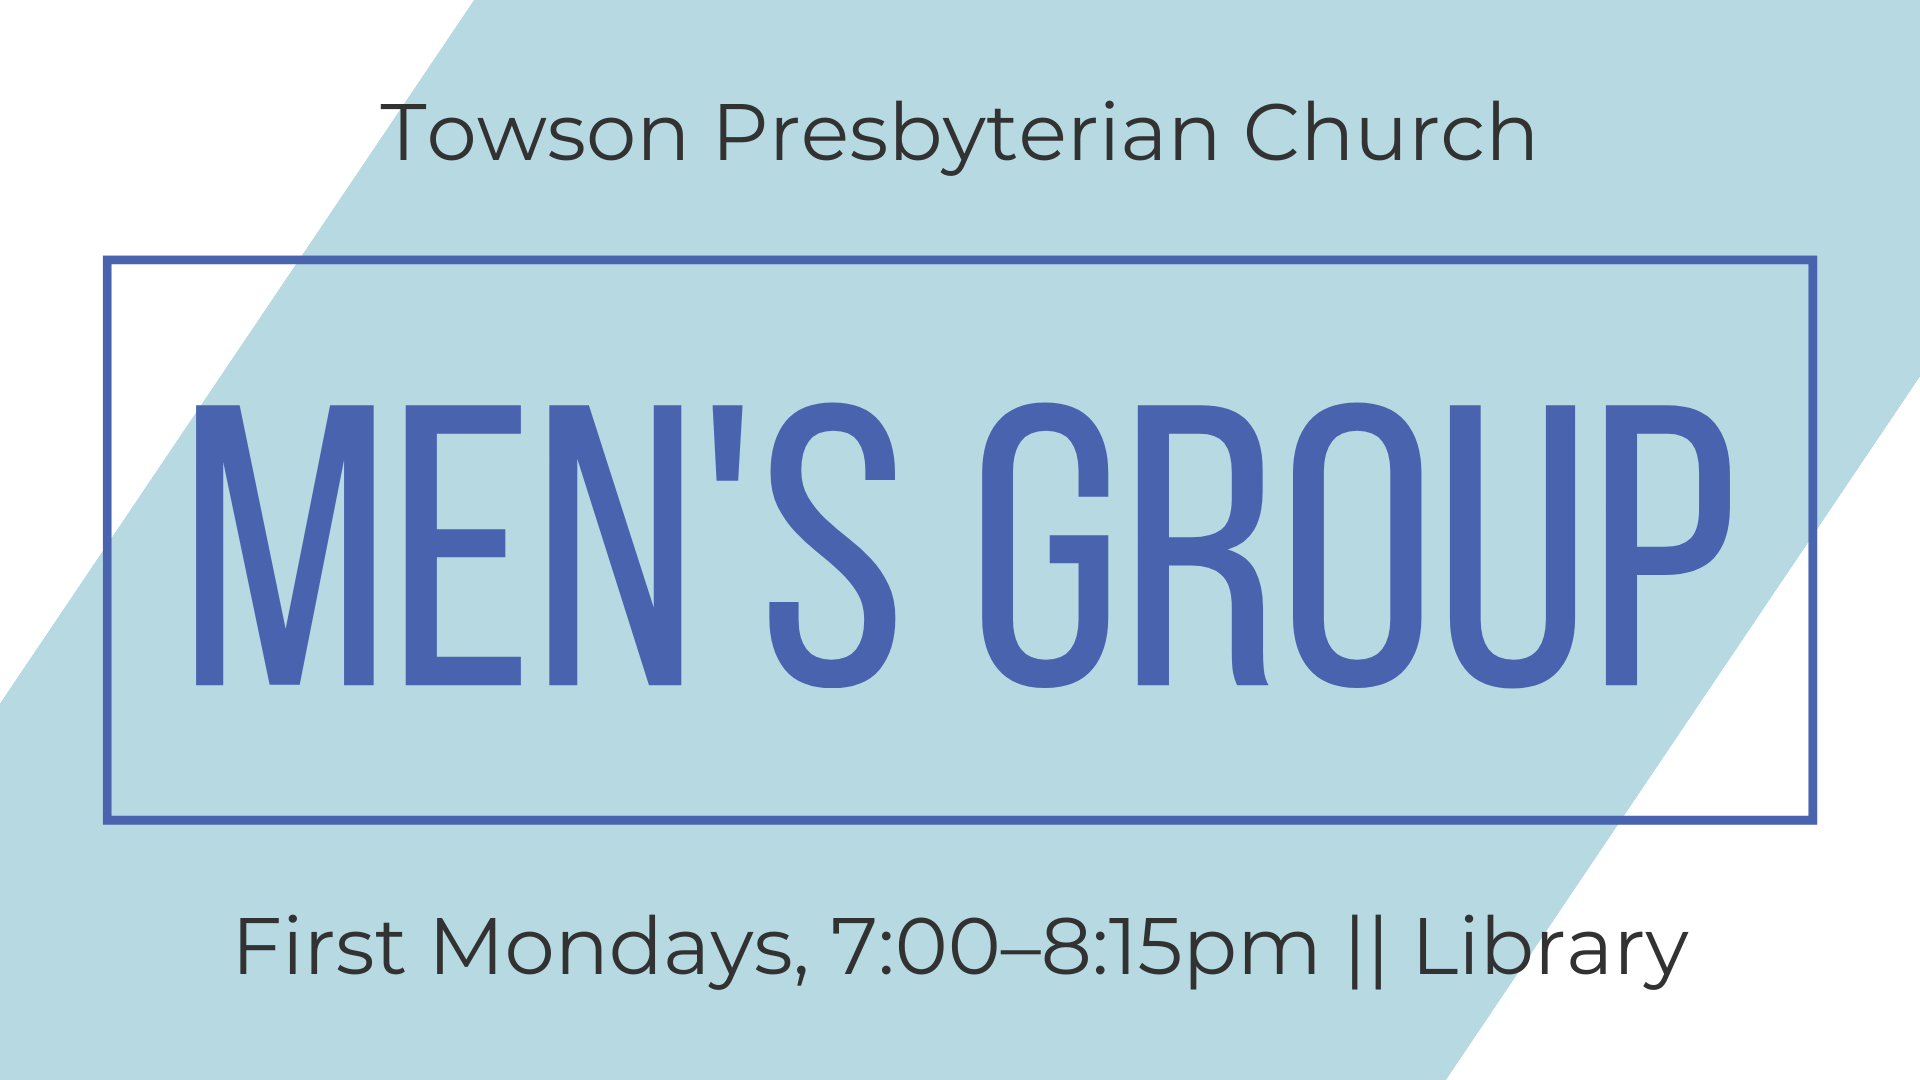 Graphic for TPC Men's Group meetings. First Mondays, 7:00-8:15pm in the library